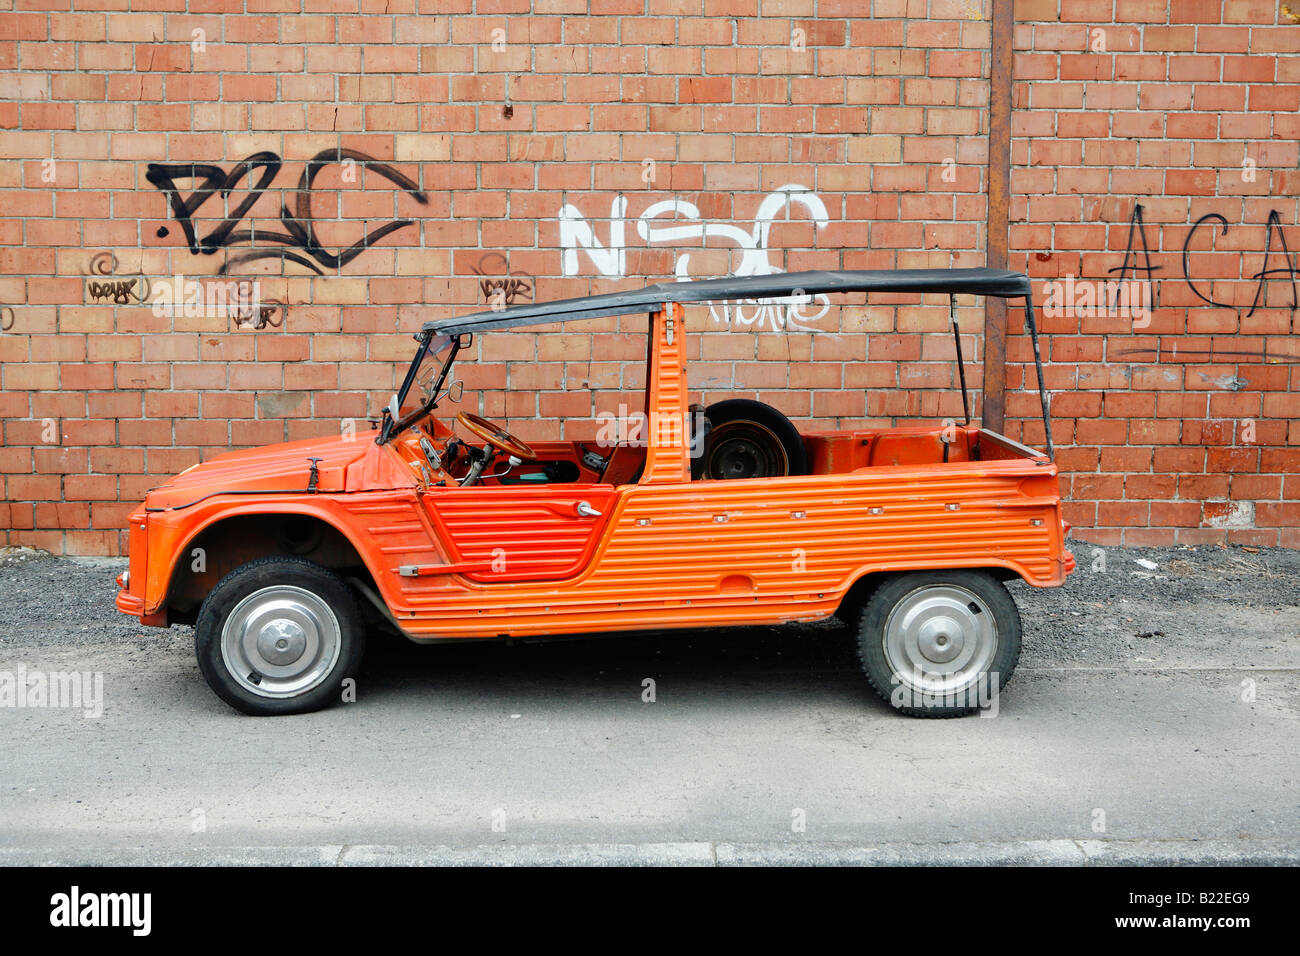 An orange red Citroen Mehari off road car stands in front of a brick wall with graffiti in Armentieres, northern France Stock Photo